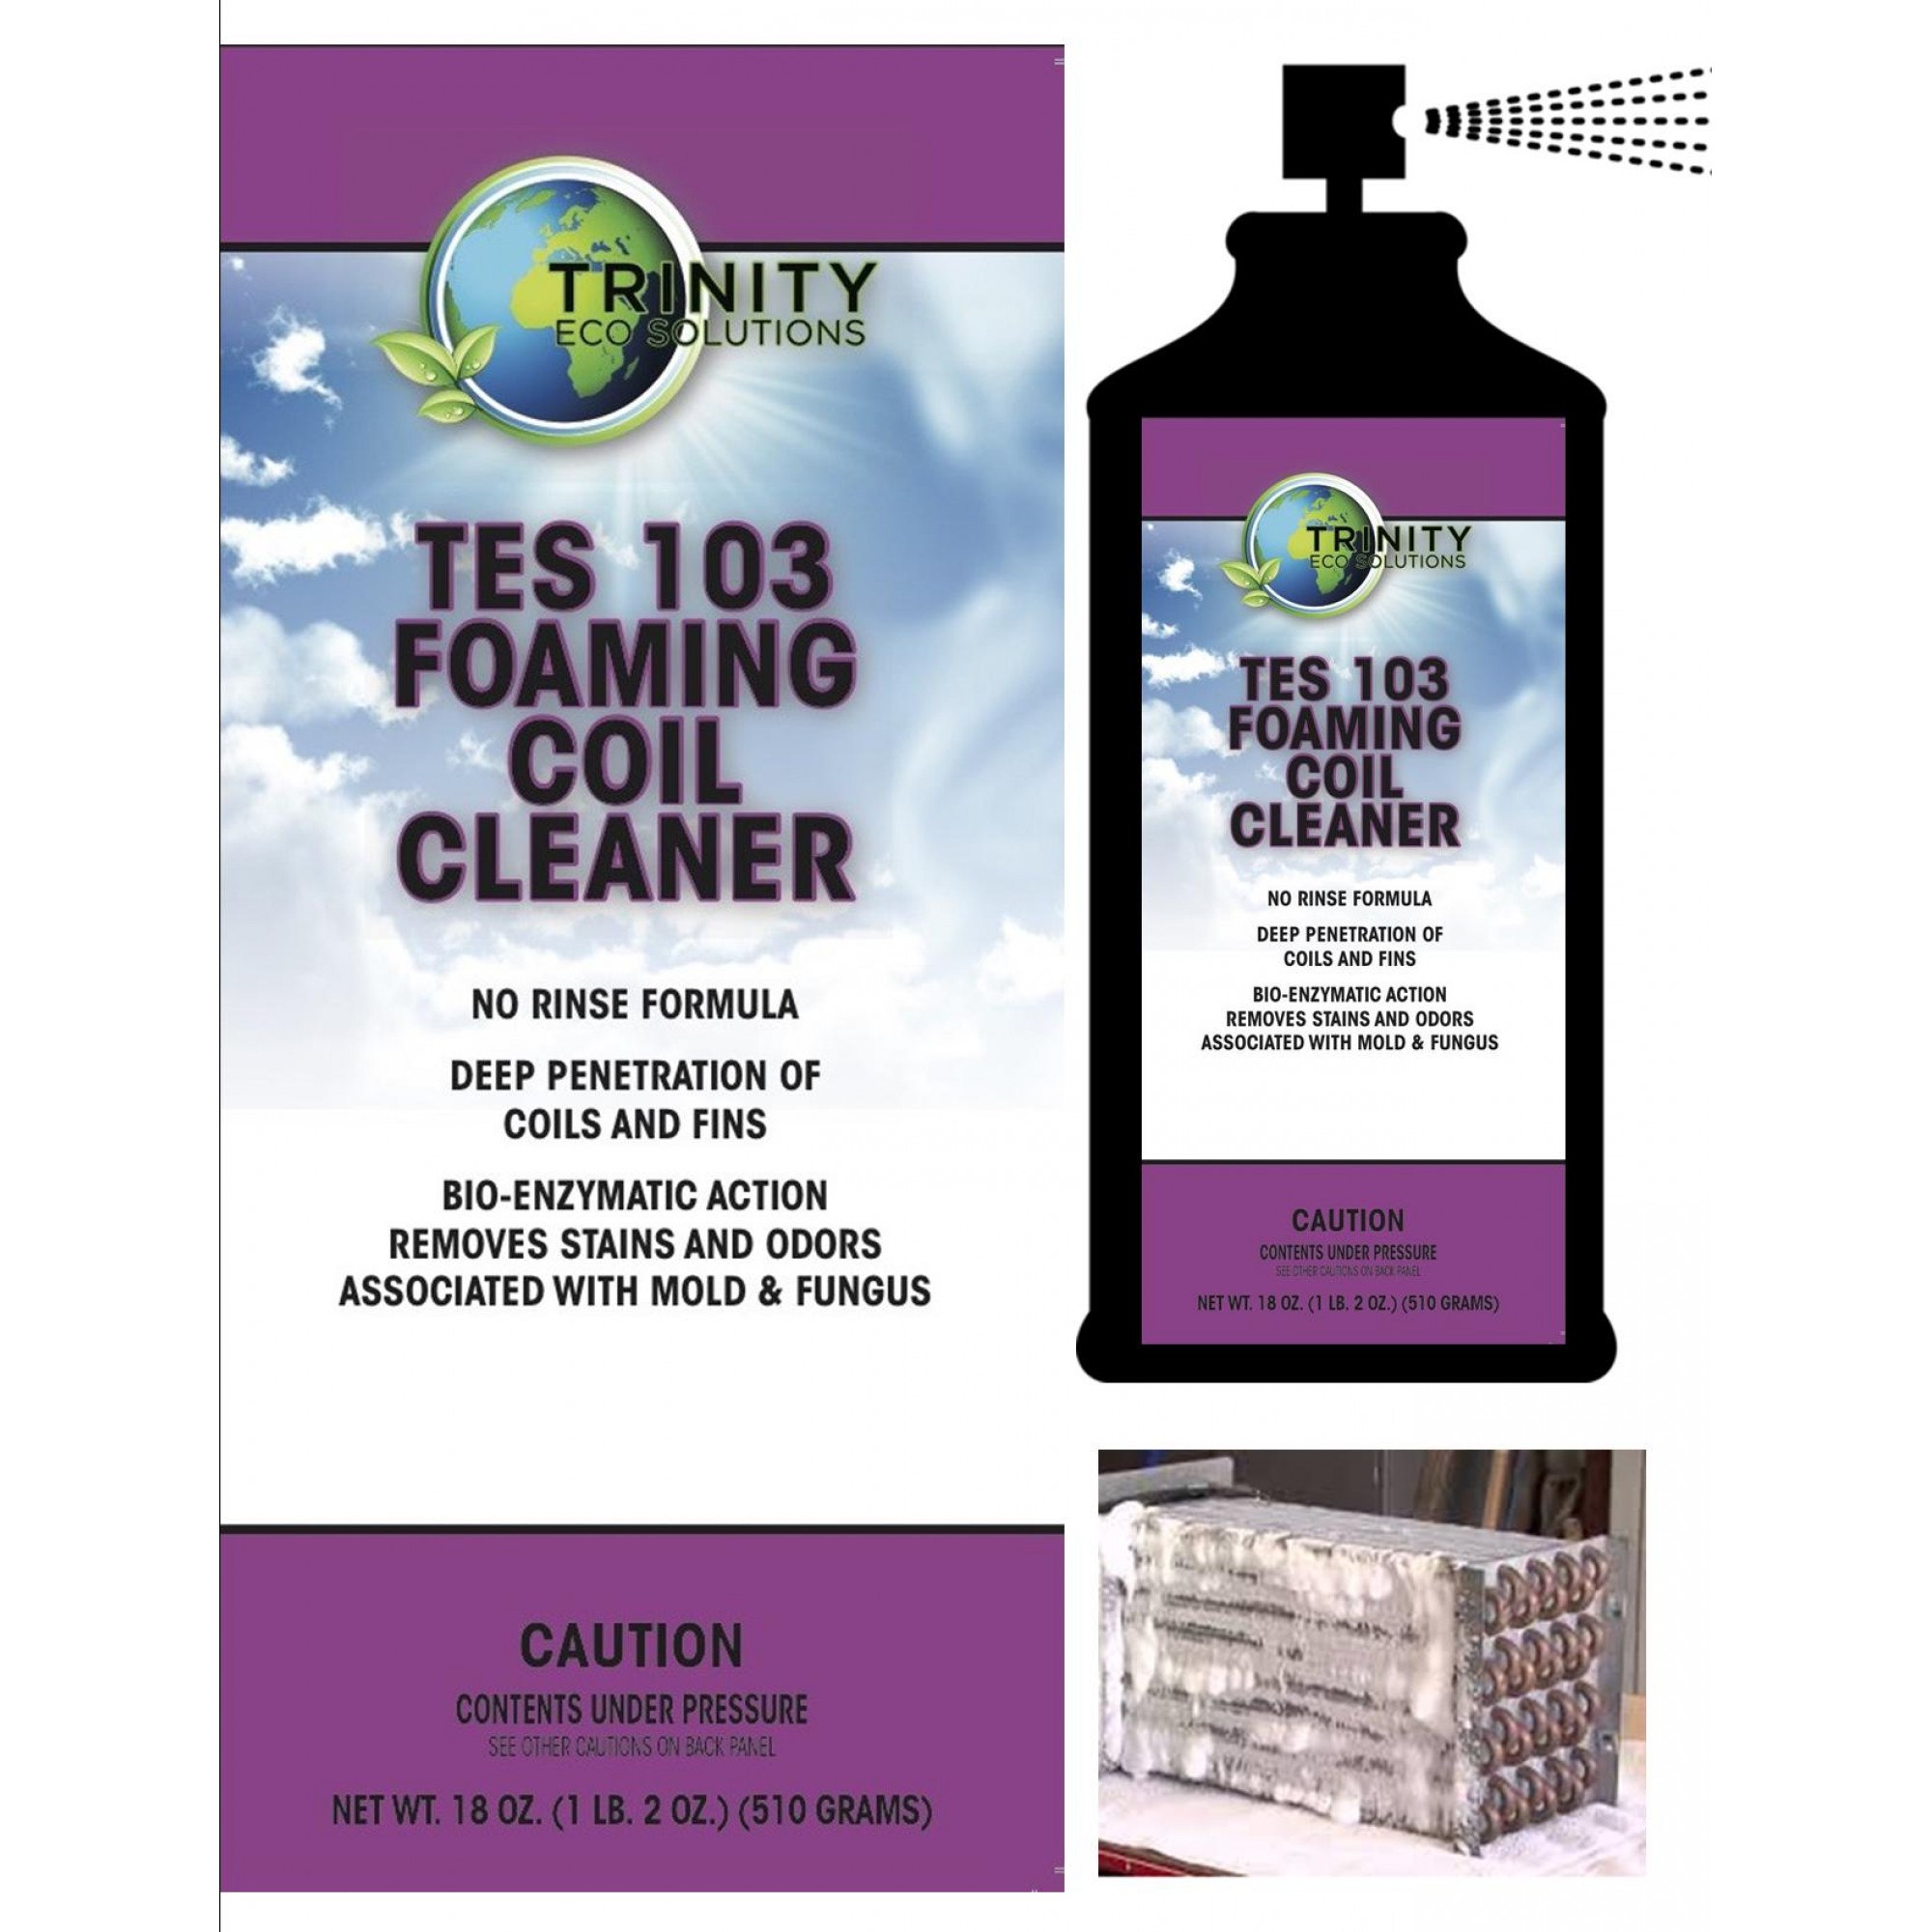 TES 103 Foaming Coil Cleaner